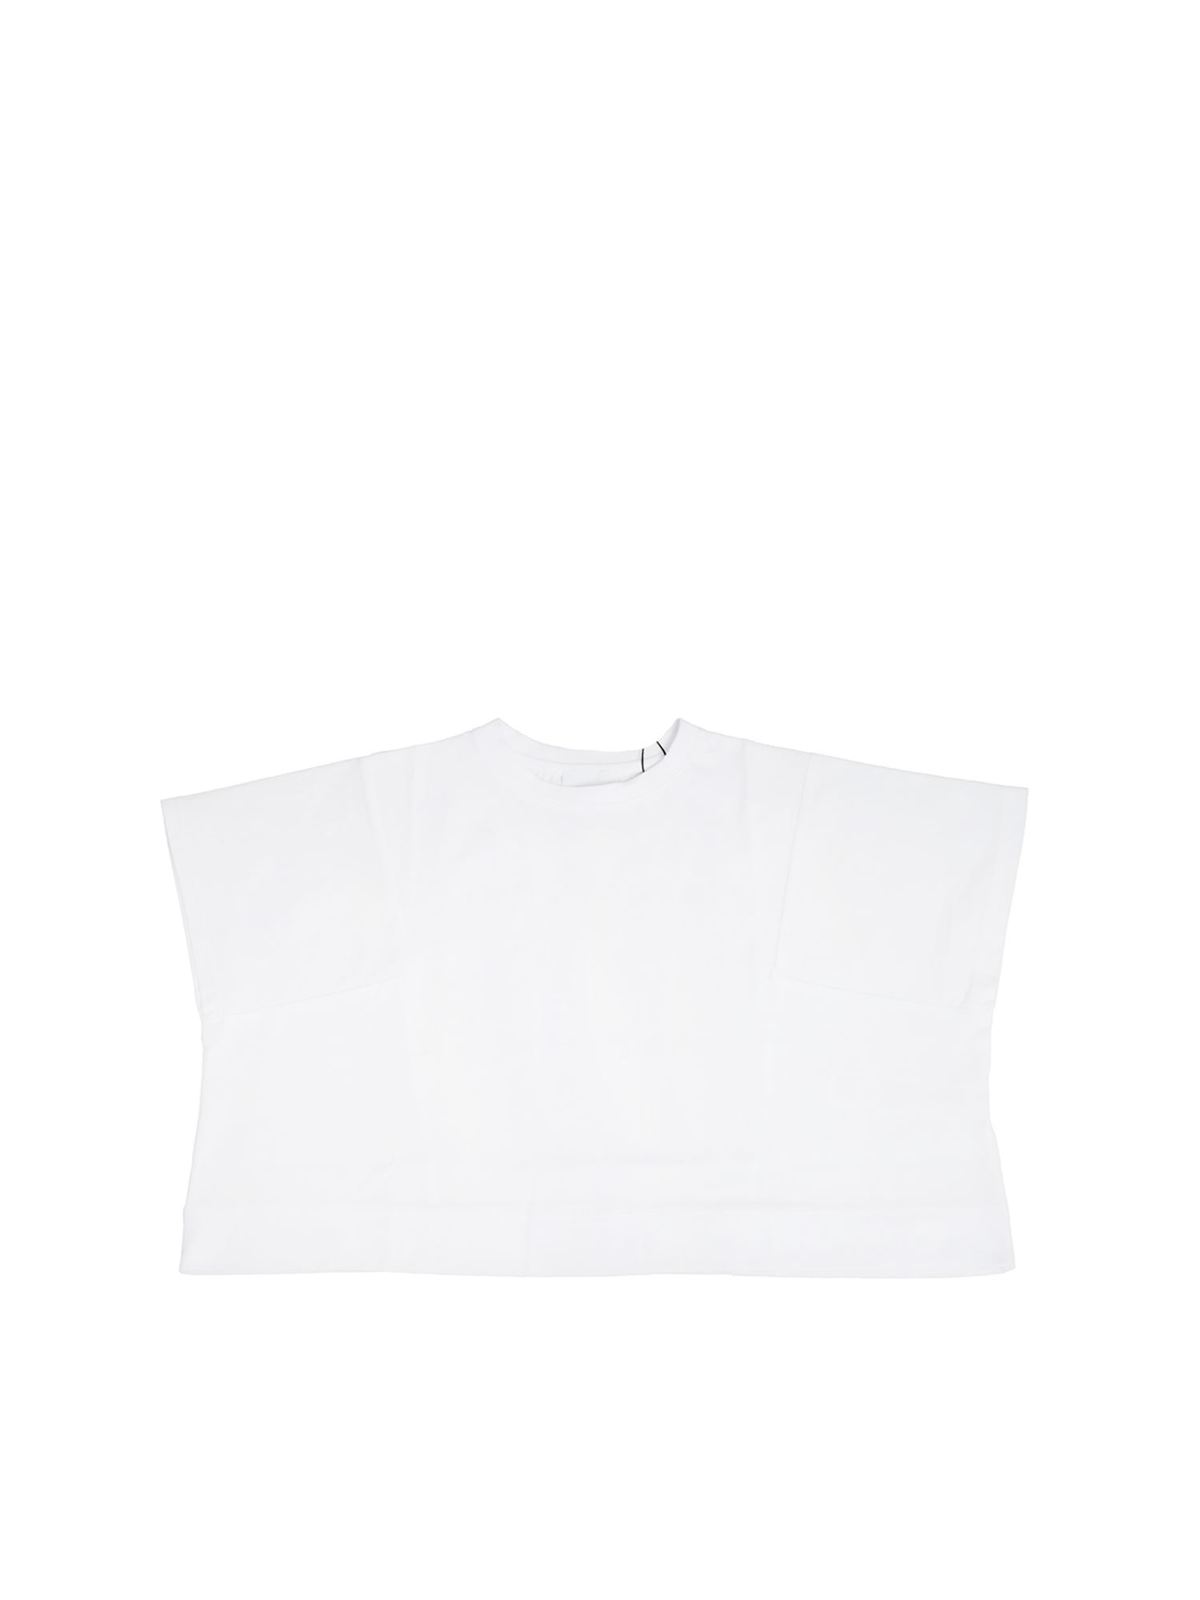 BURBERRY SAWYER T-SHIRT IN WHITE